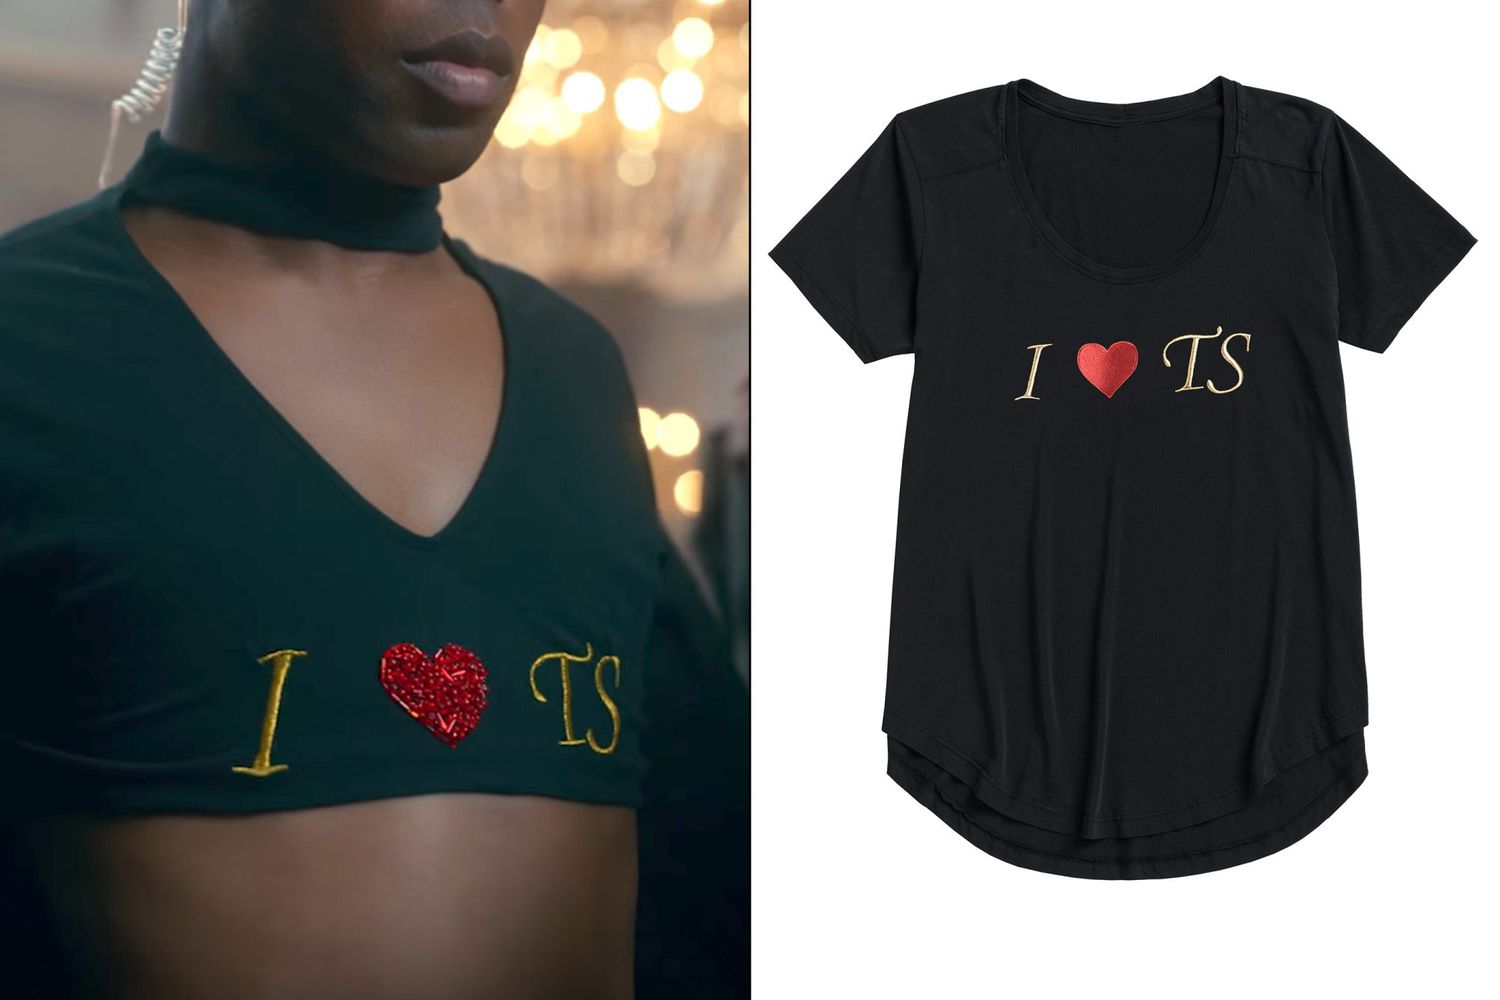 'Look What You Made Me Do' Video: Embroidered Tee